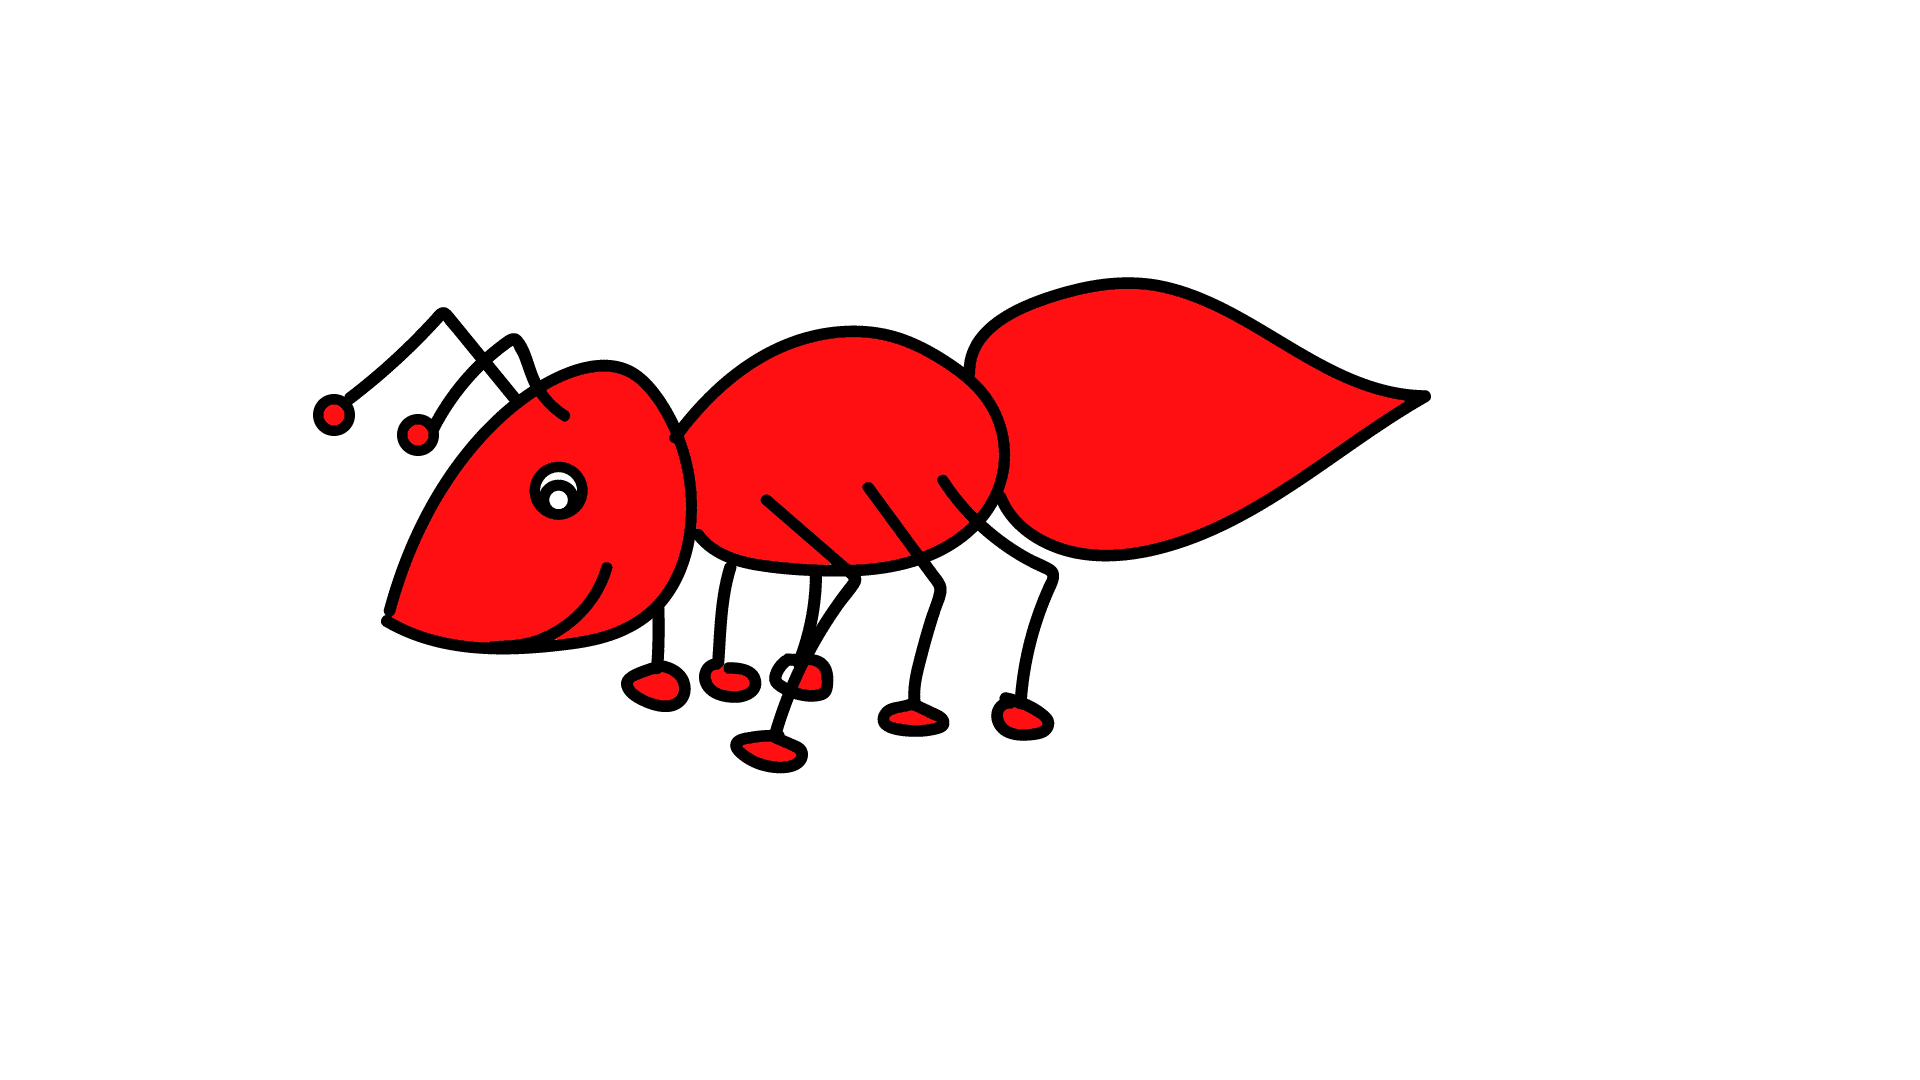 How To Draw An Ant - Step 7